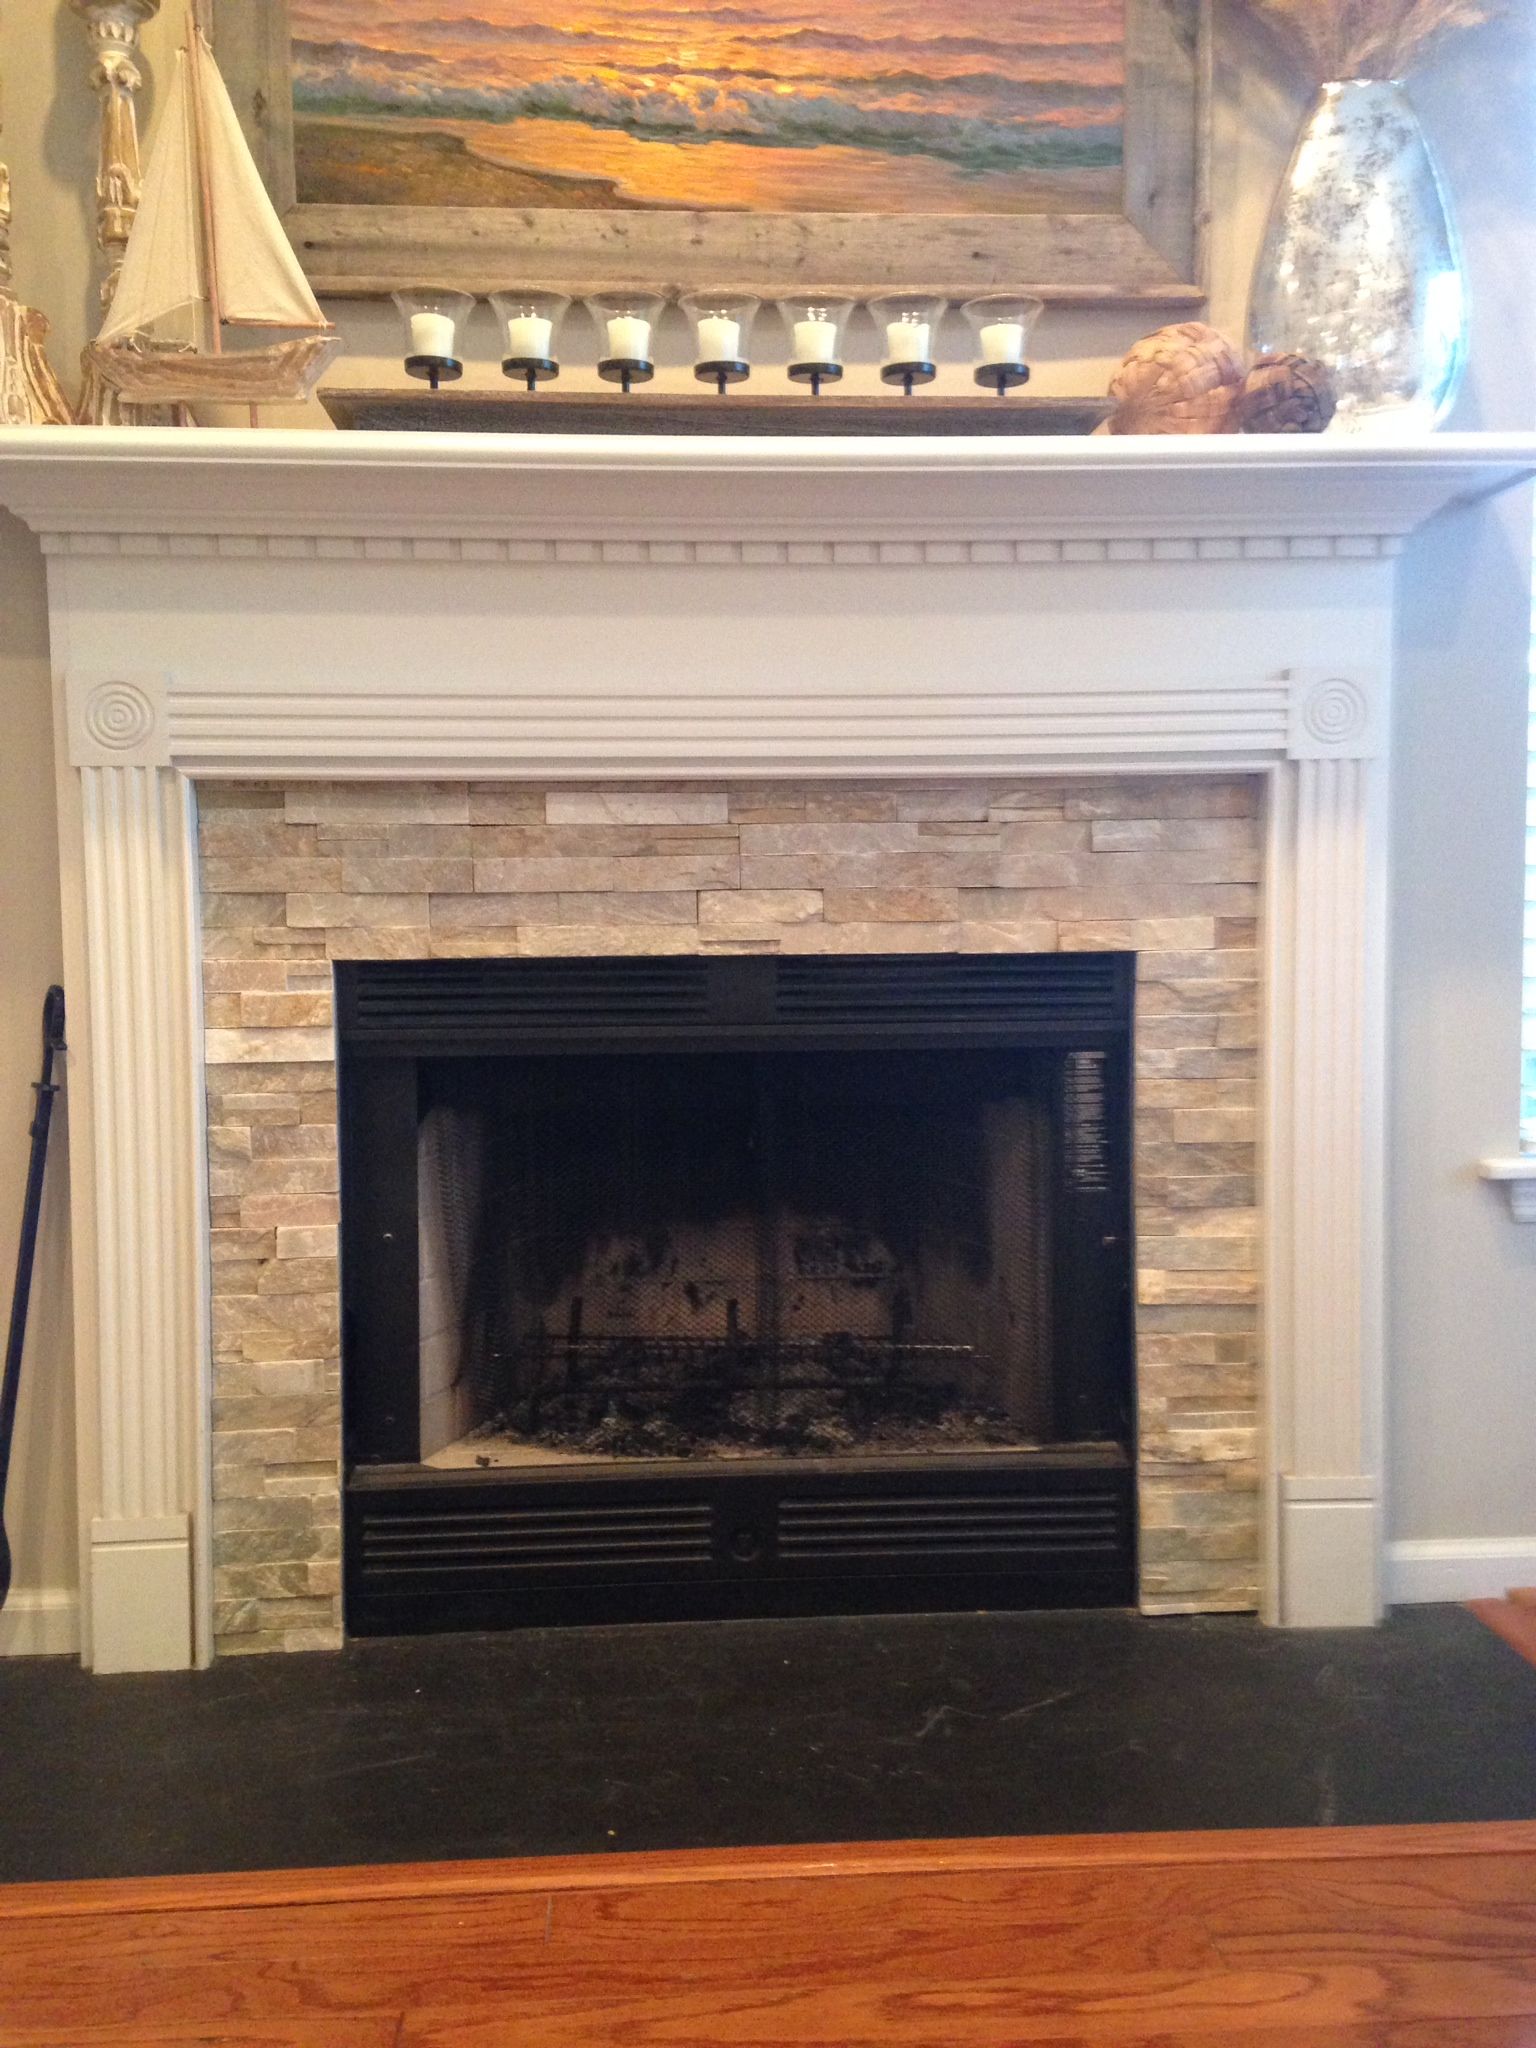 Stacked Stone Fireplaces with Mantle Unique Fireplace Idea Mantel Wainscoting Design Craftsman